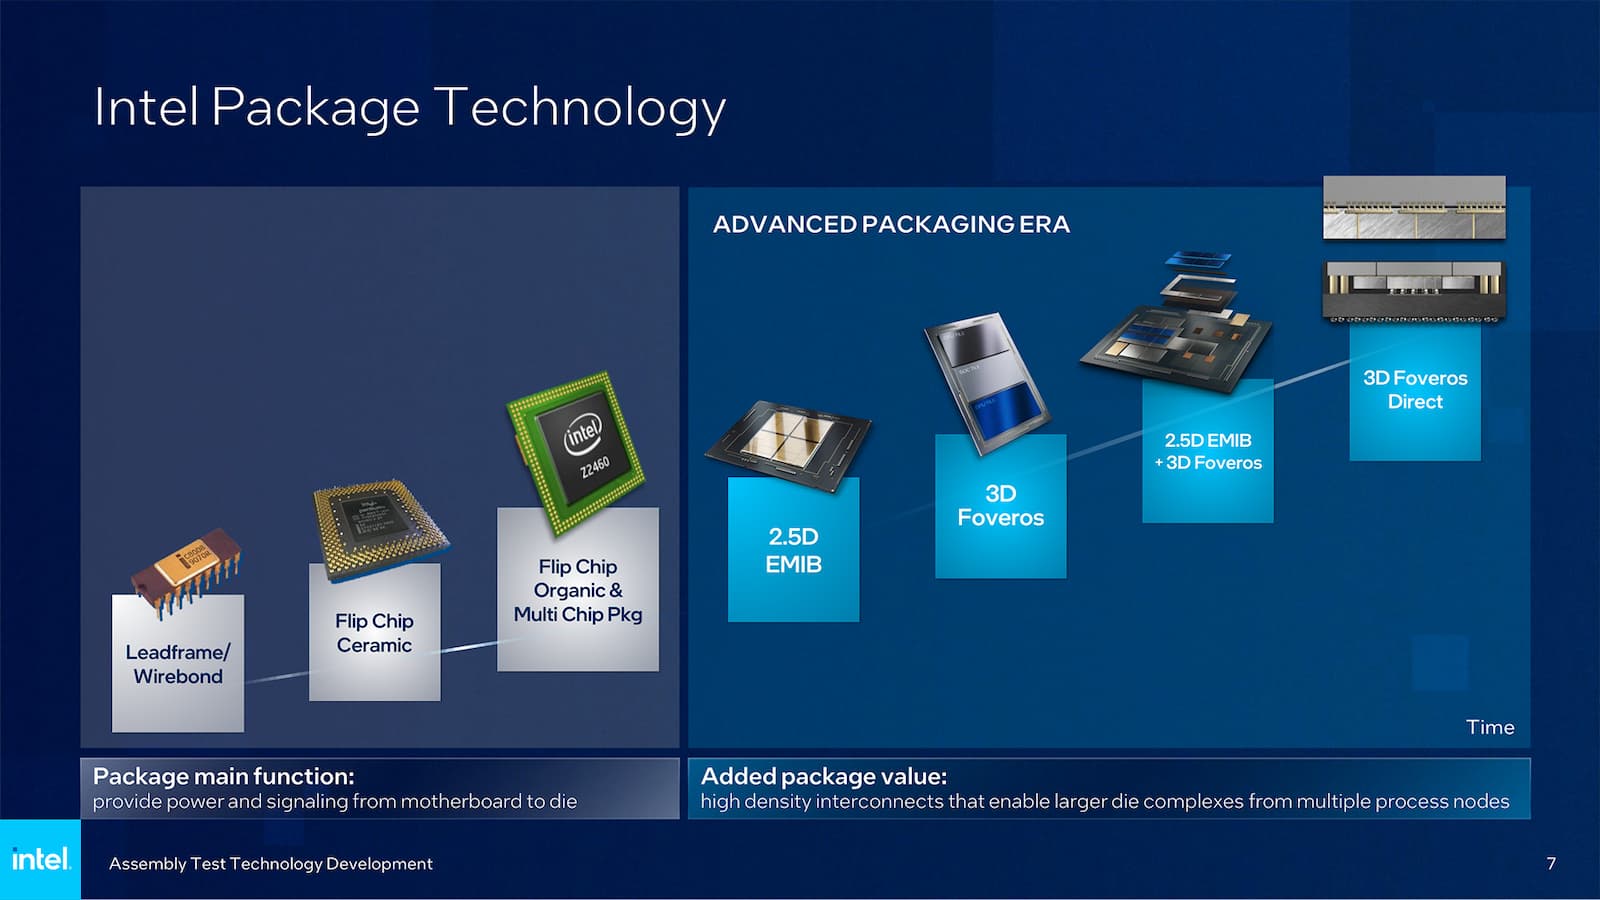 Industrie des puces : Intel PAckage Technology Foveros